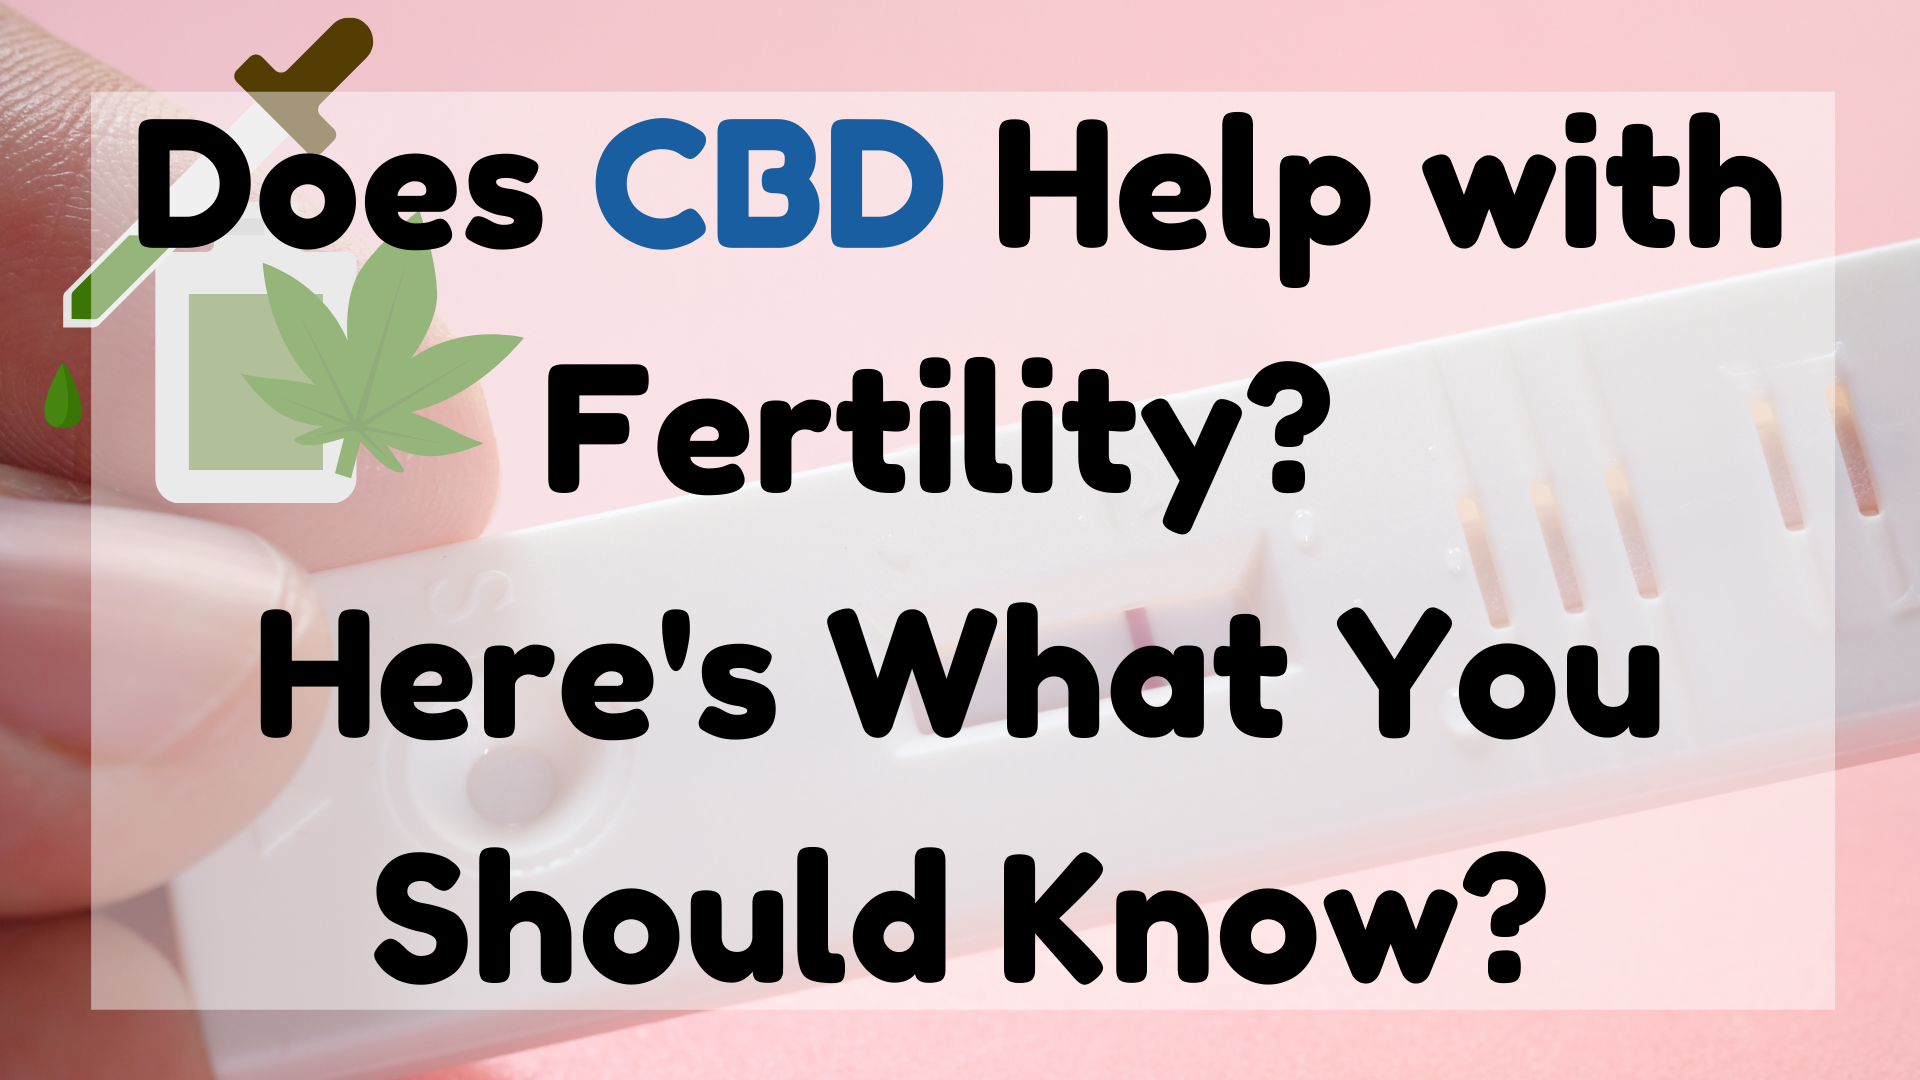 Does CBD Help with Fertility?